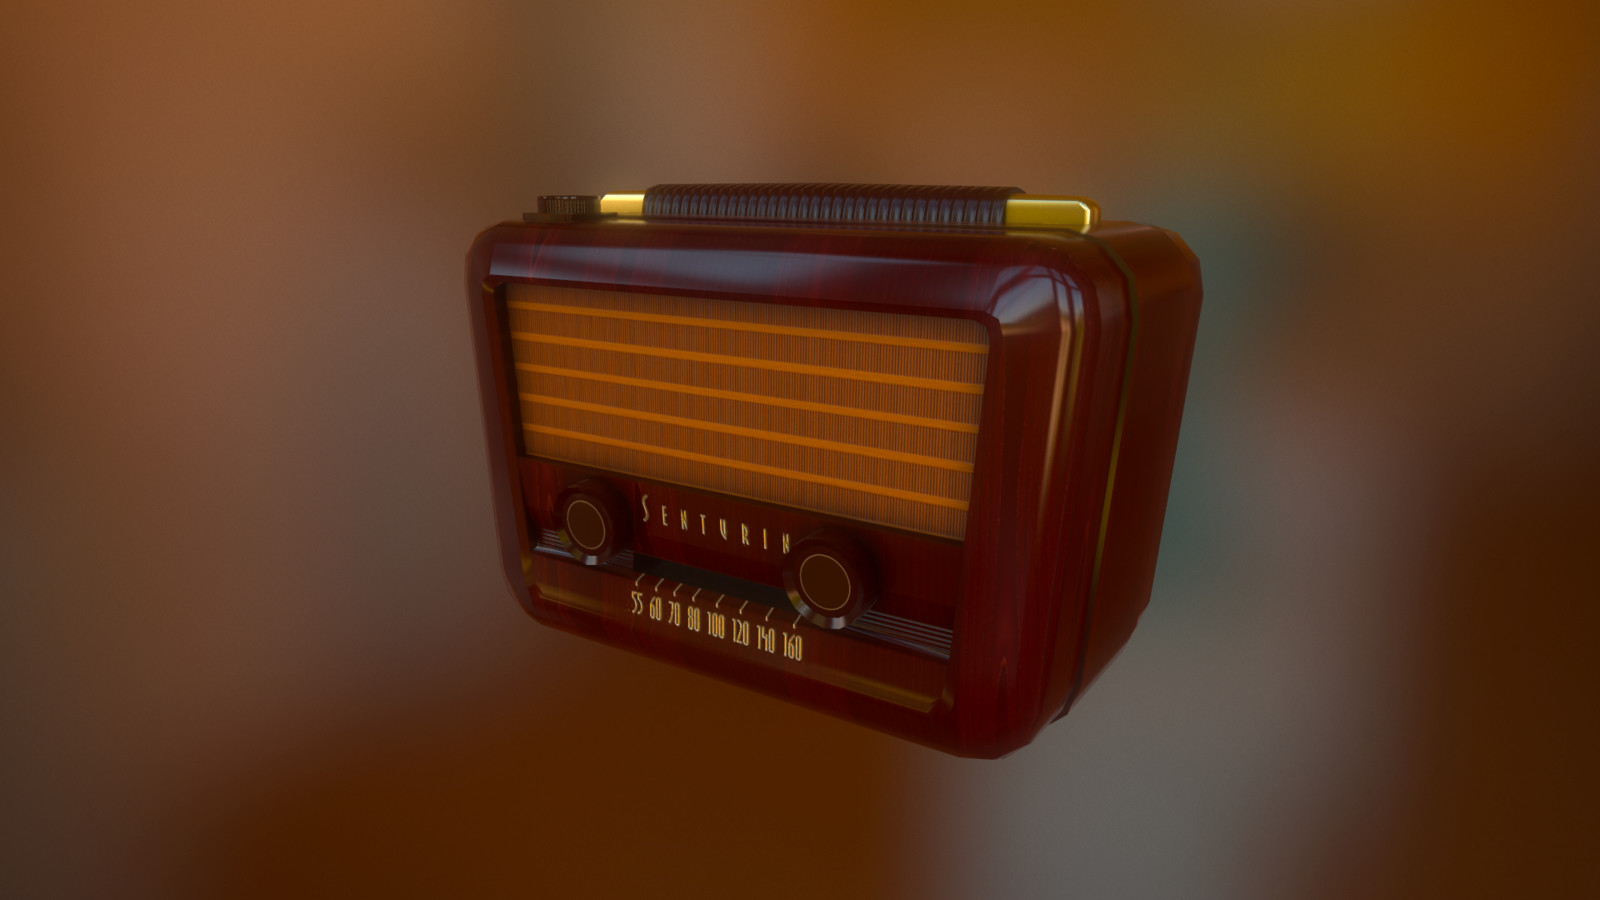 Old Radio that I textured using Substance Painter